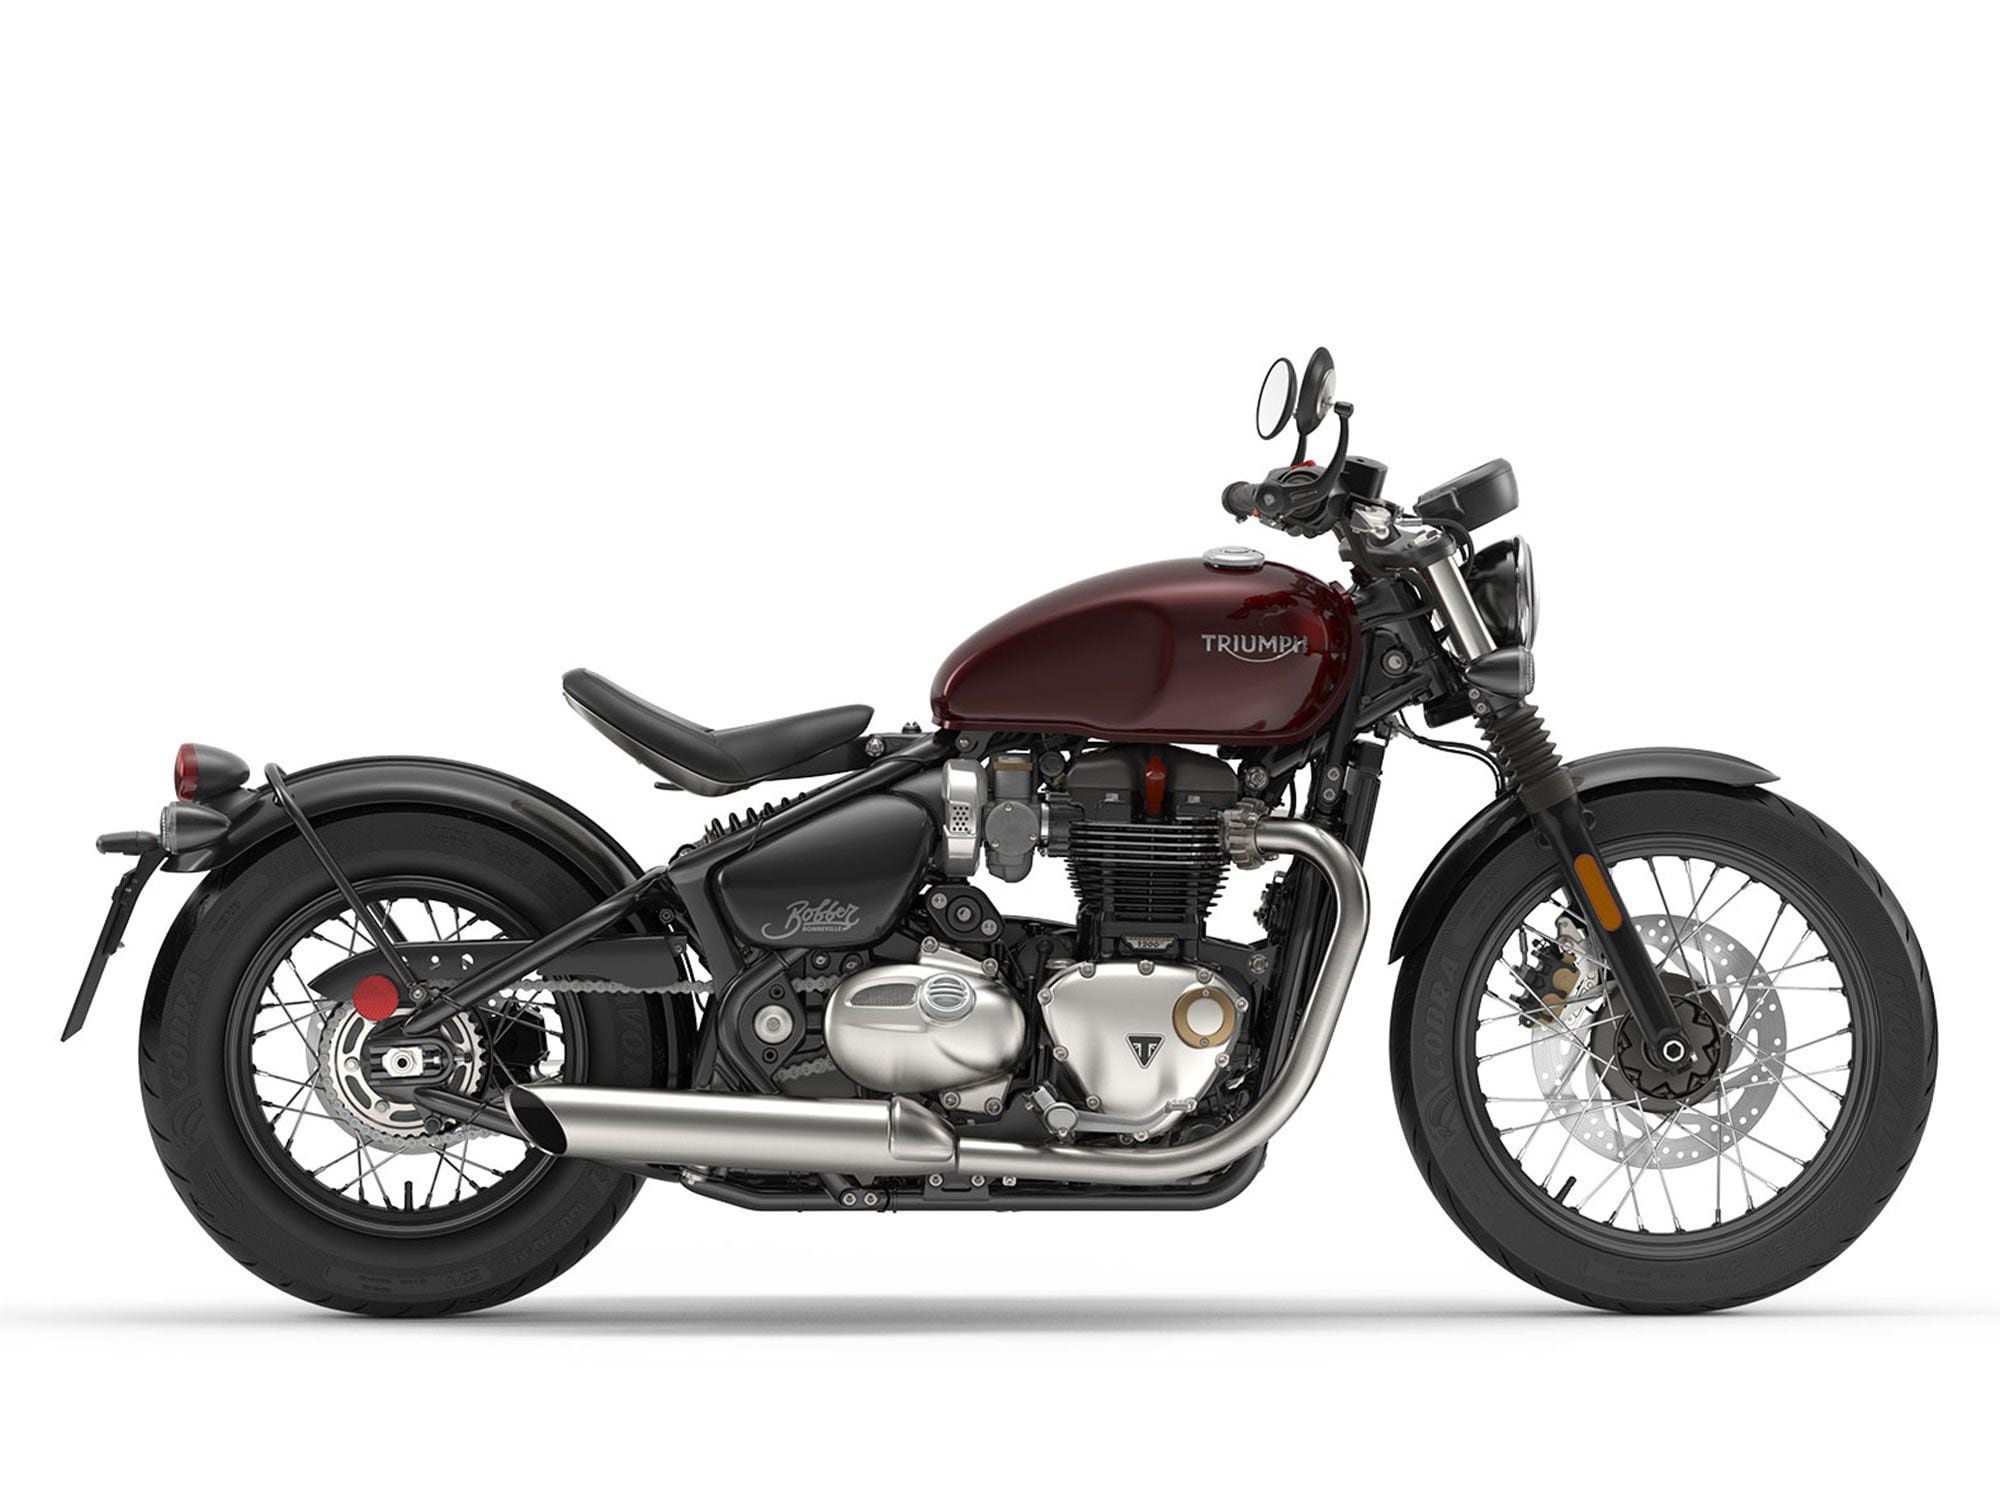 Triumph Bobber/Bobber Black Buyer's Guide: Photos, Price | Cycle World